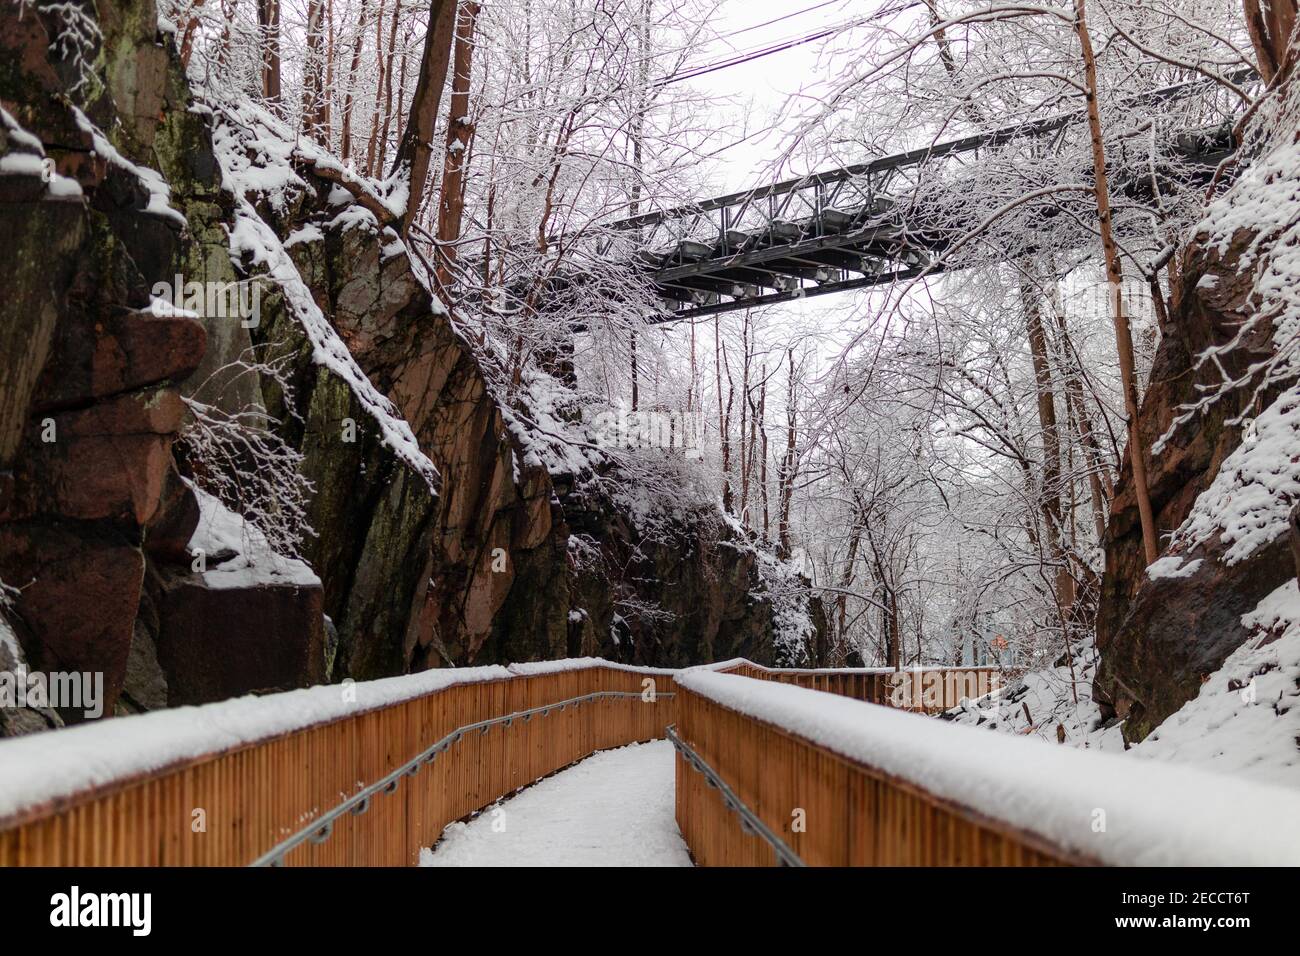 The Trolley Line #9 trail in a snowstorm. Stock Photo